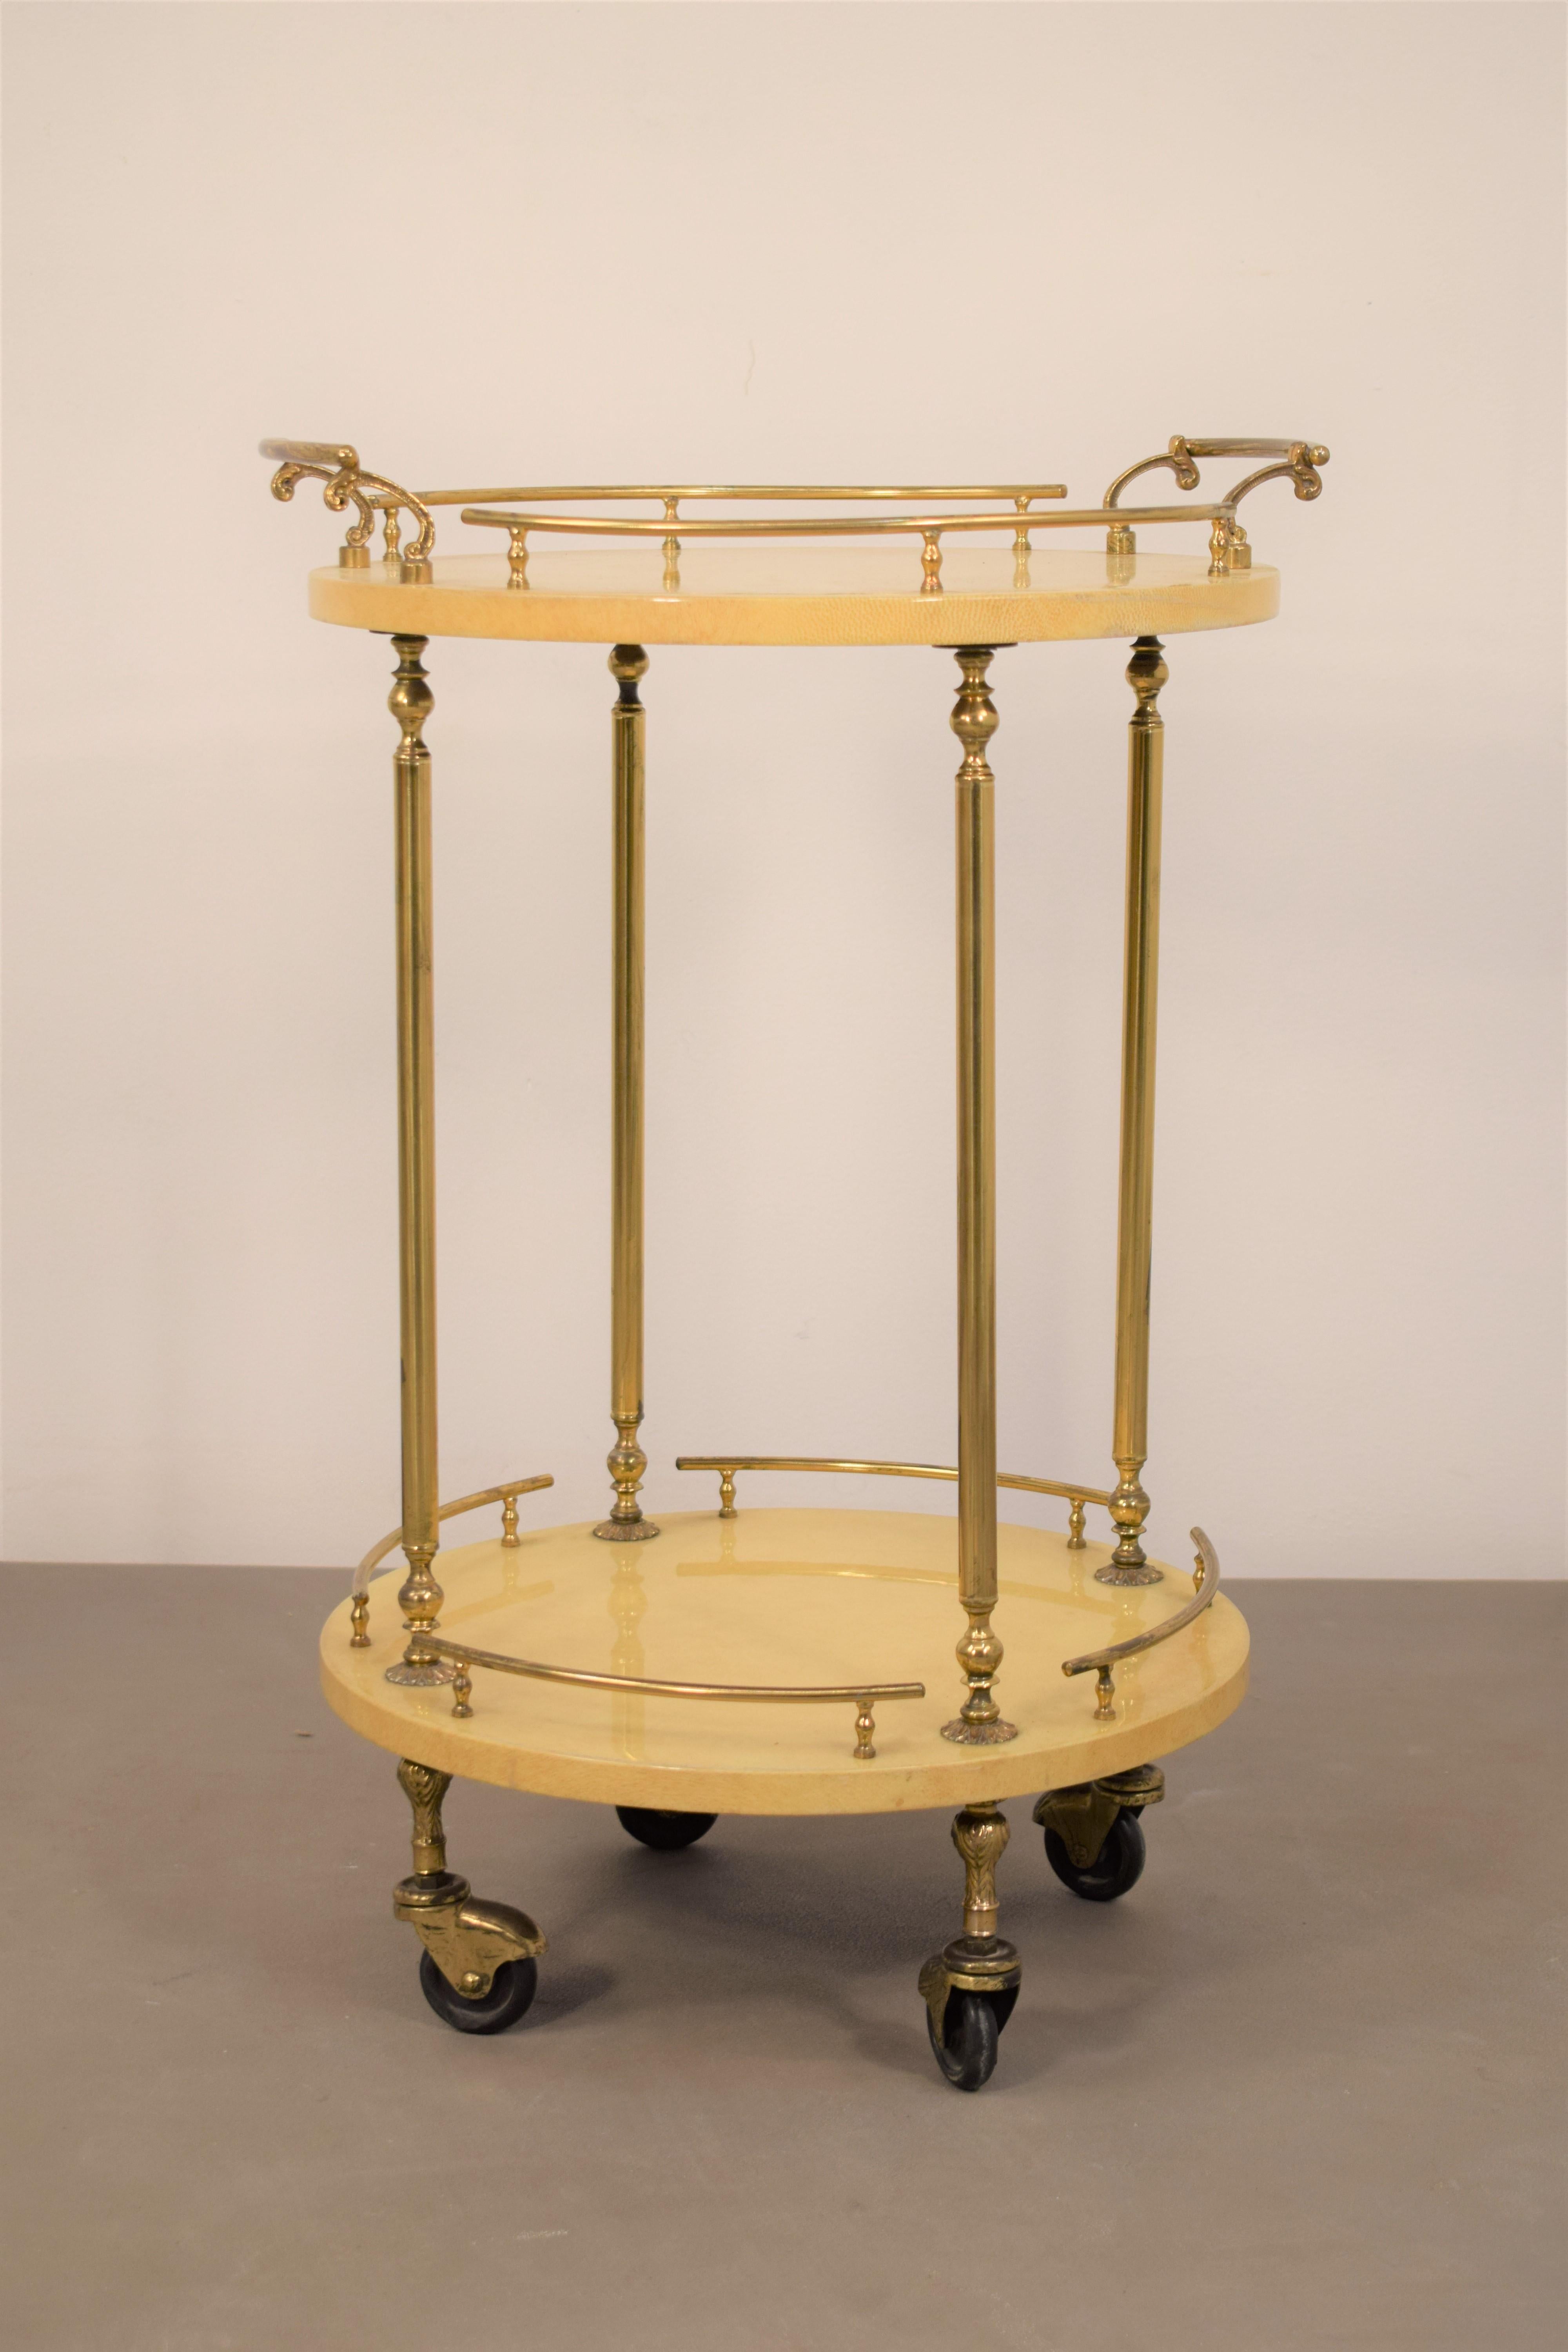 Italian midcentury bar cart or trolley in lacquered goatskin by Aldo Tura, 1960s.
Dimensions: H= 60 cm; D= 36 cm.